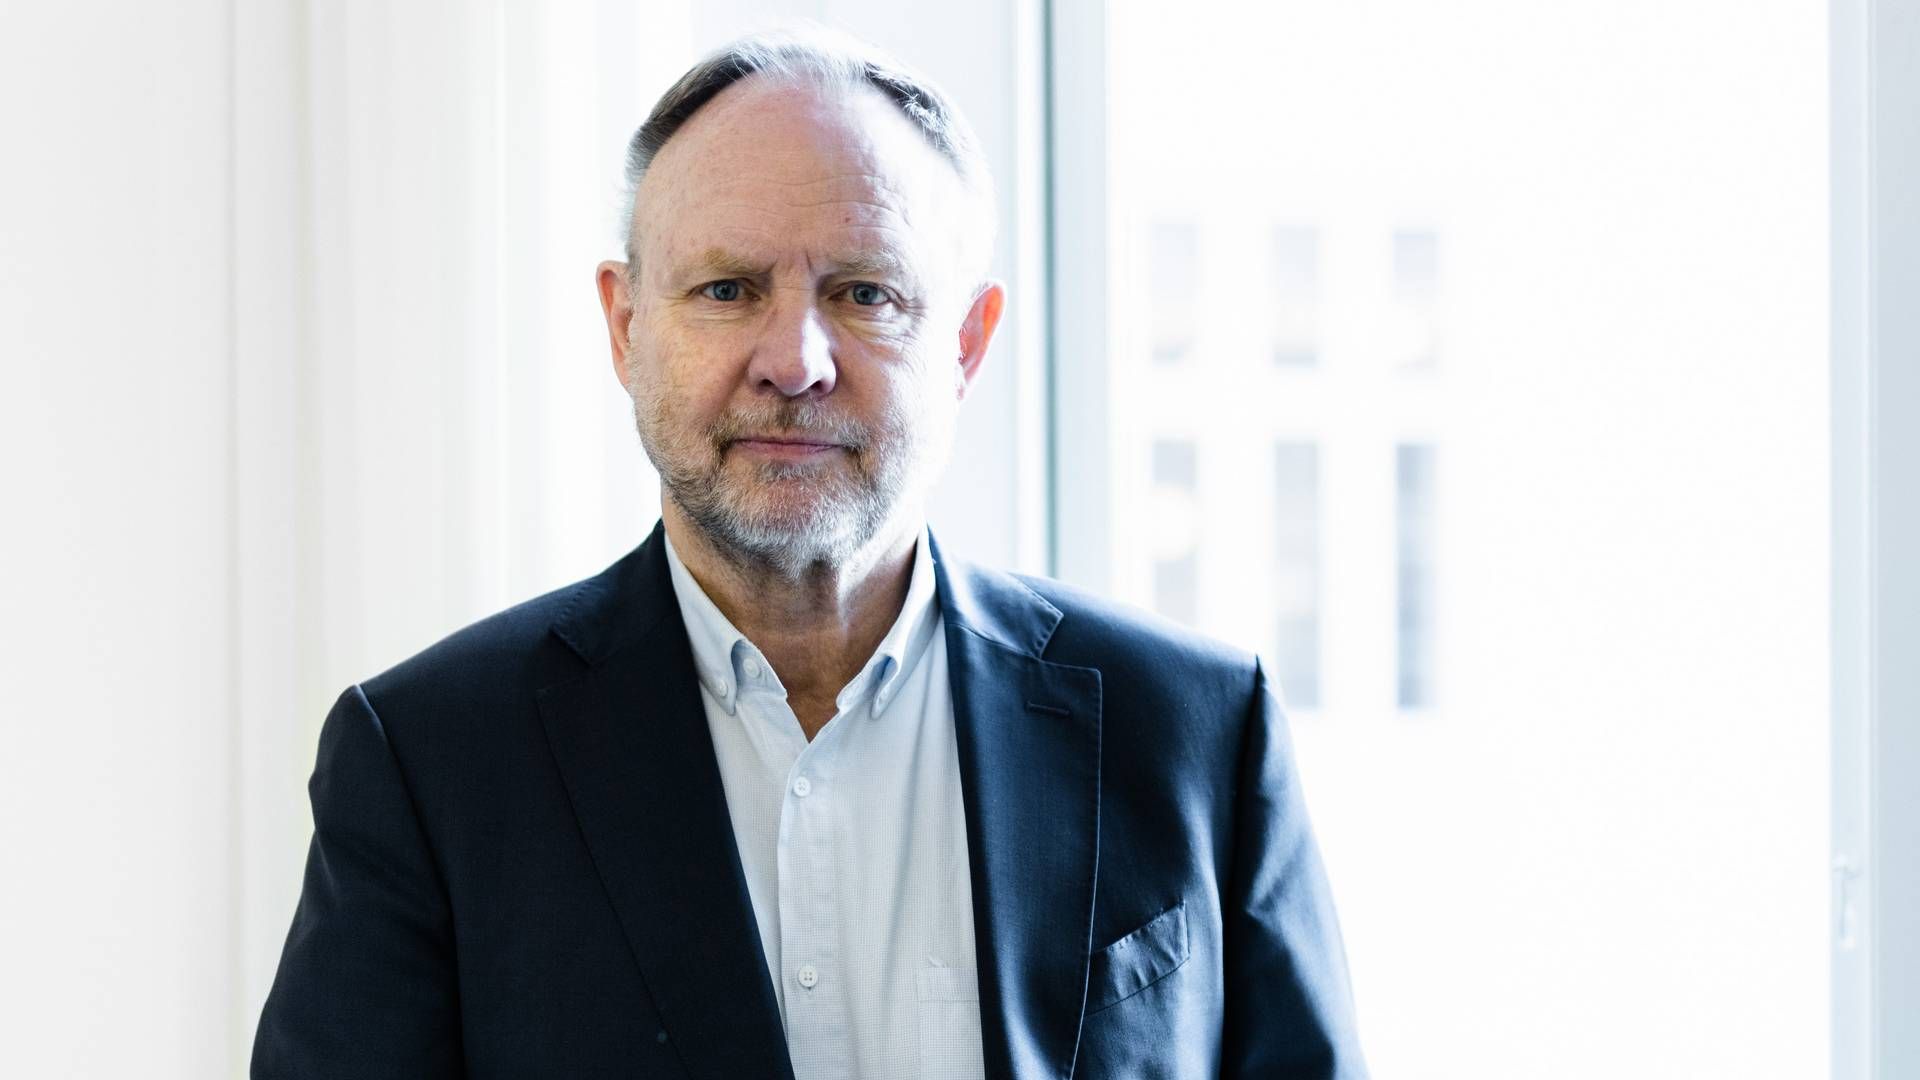 The former owner of consultancy firm Kirstein, Jesper Kirstein, is a new board member of pension platform pensions.dk. | Photo: Pr/kirstein A/s